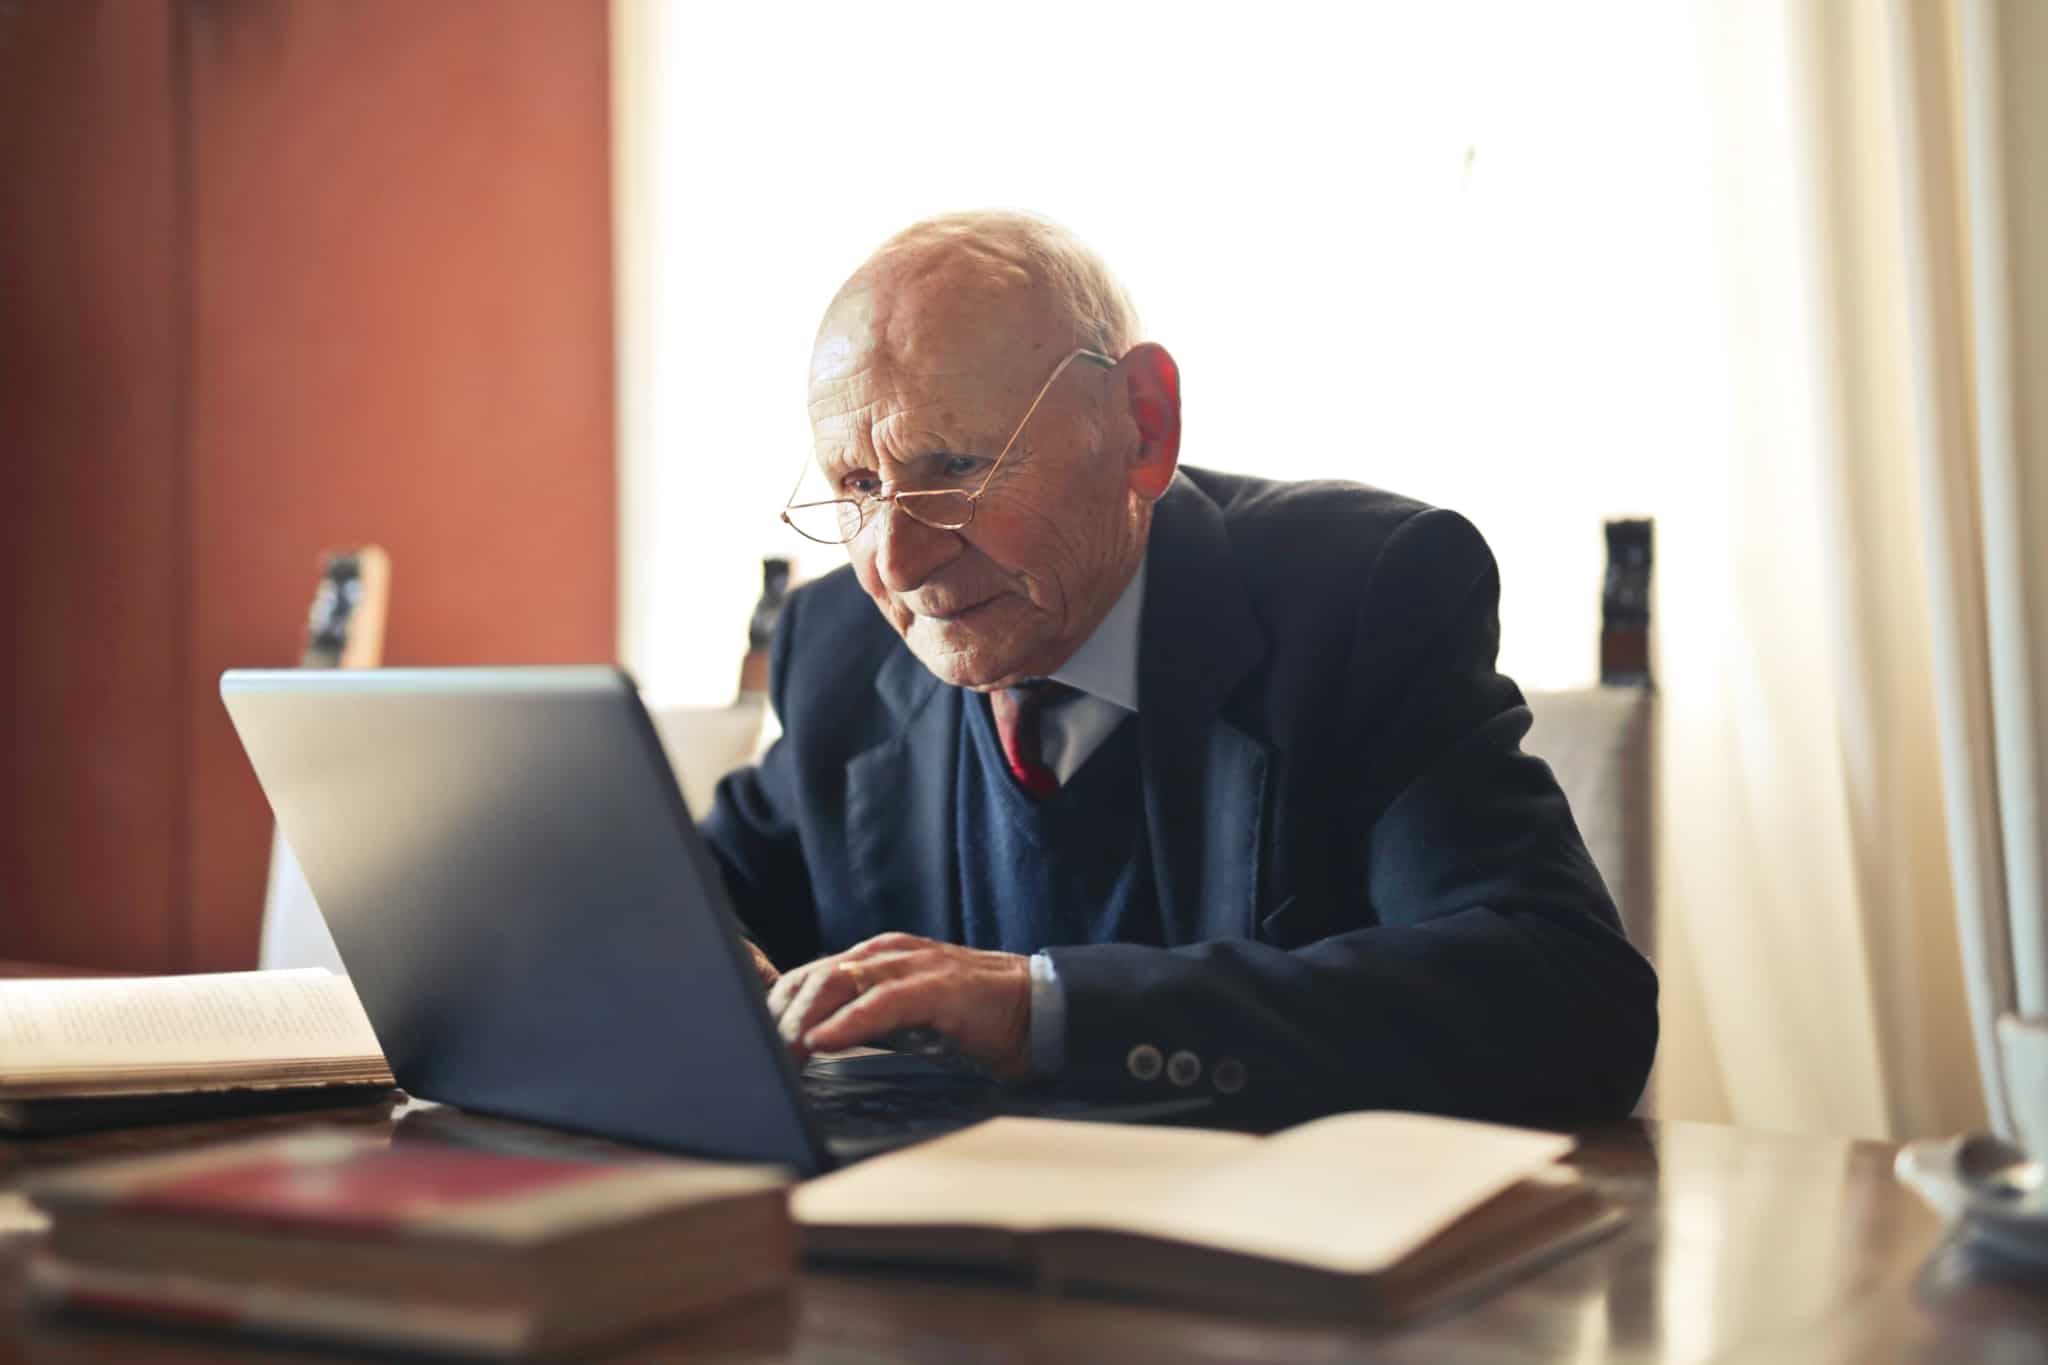 A lawyer working on his laptop